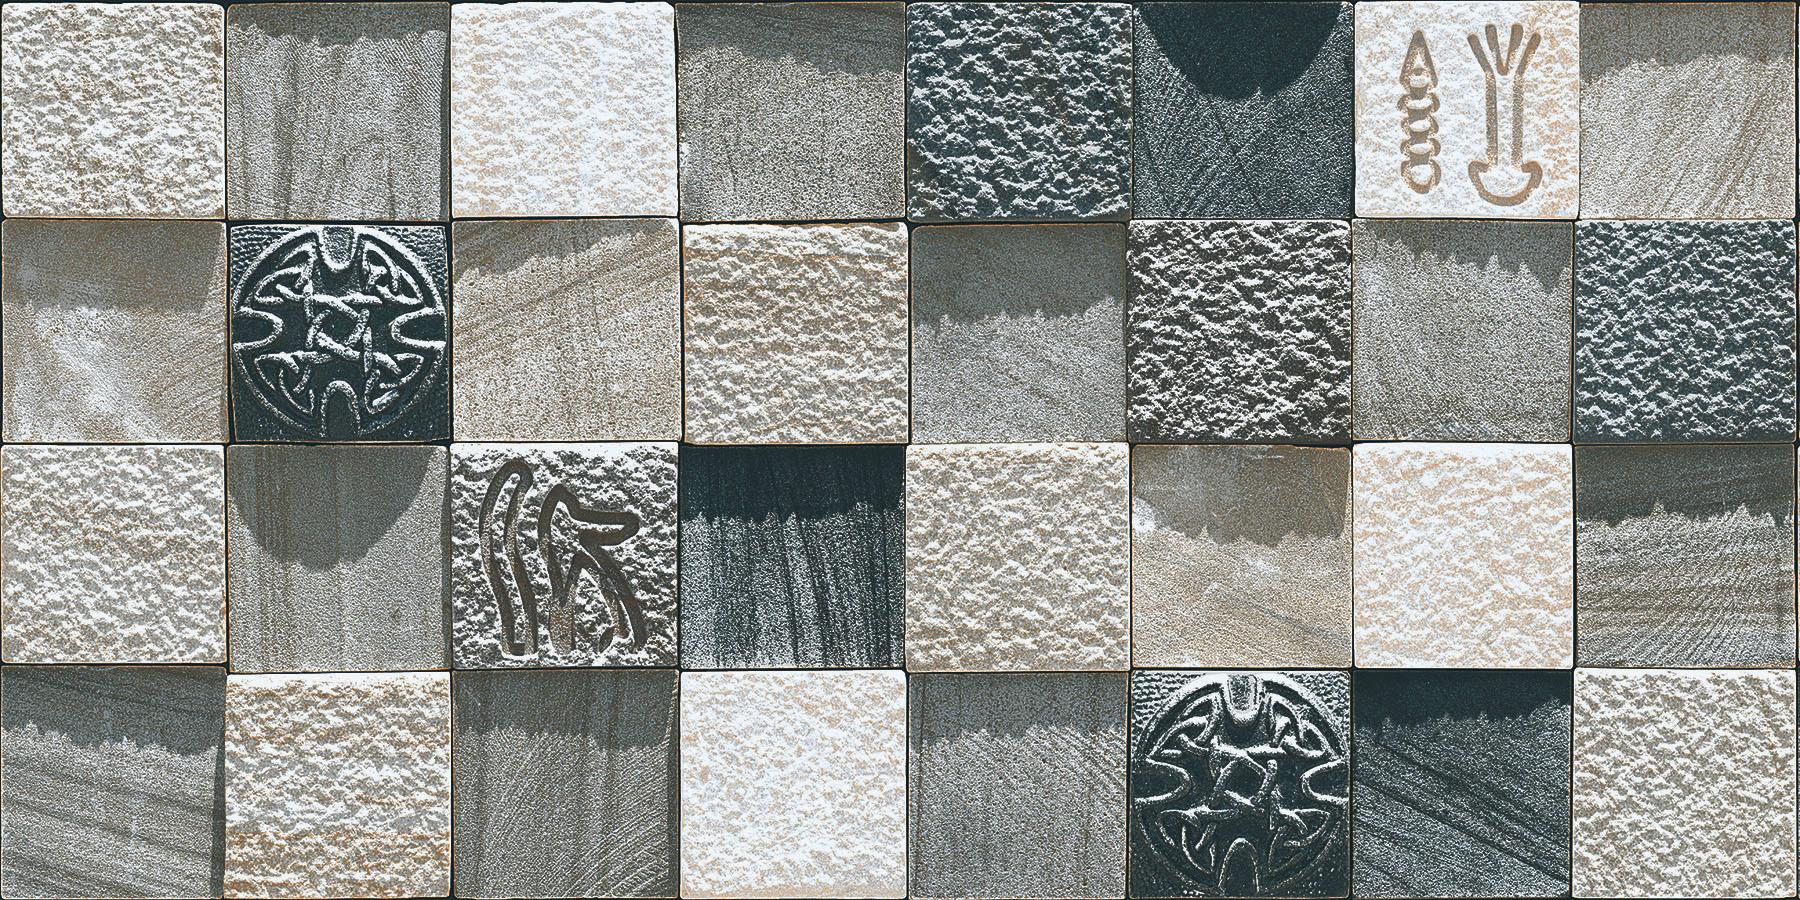 Wall Tiles for Bathroom Tiles, Living Room Tiles, Elevation Tiles, Accent Tiles, Hospital Tiles, Bar/Restaurant, Commercial/Office, Outdoor Area, School & Collages